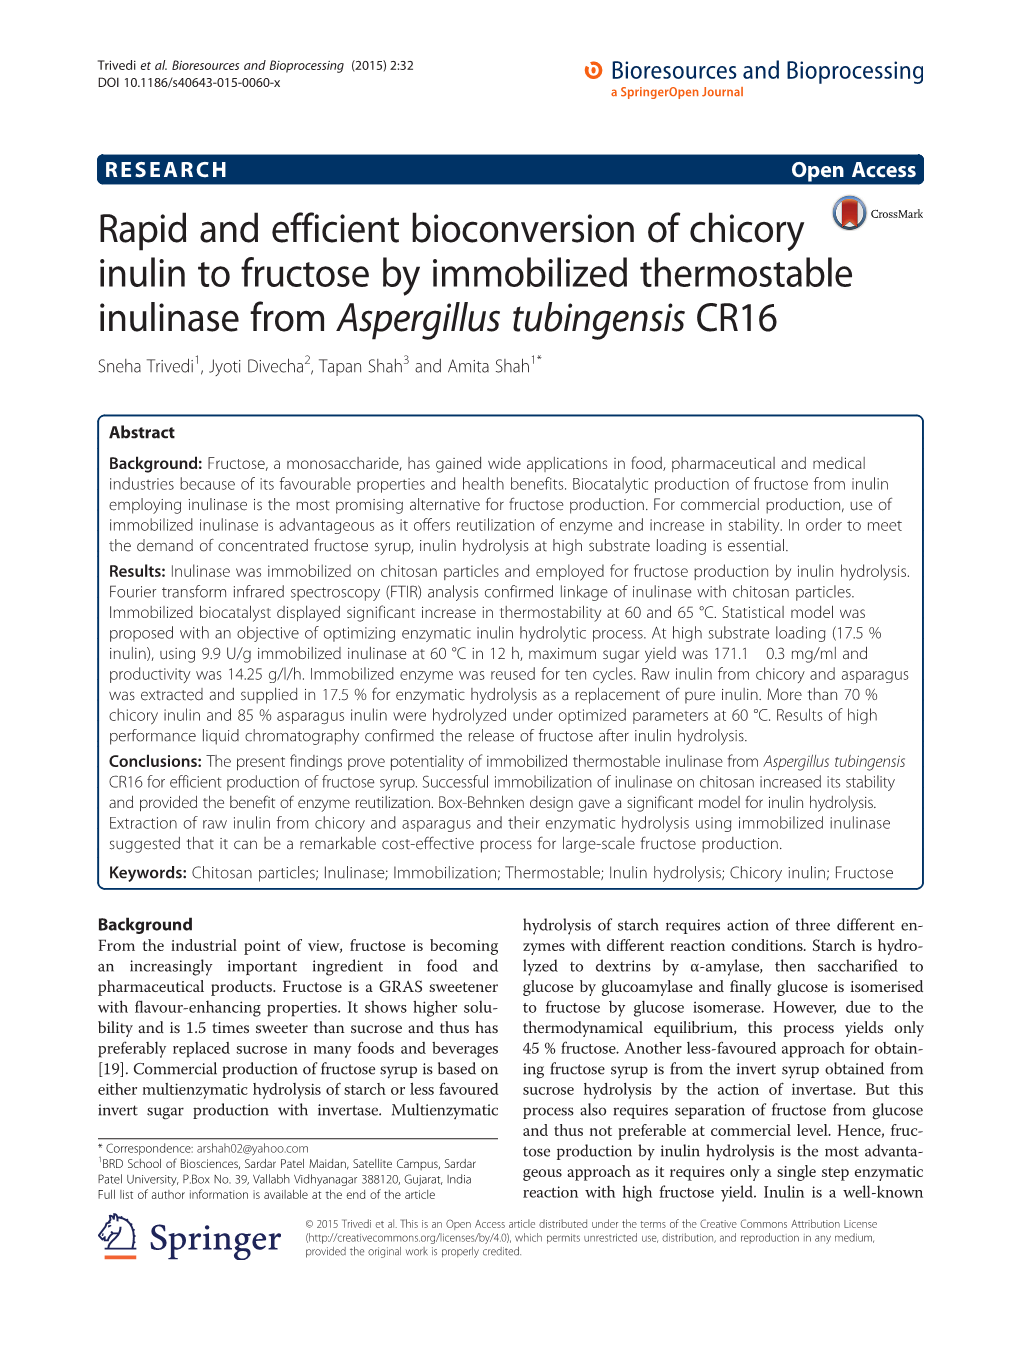 Rapid and Efficient Bioconversion of Chicory Inulin to Fructose By